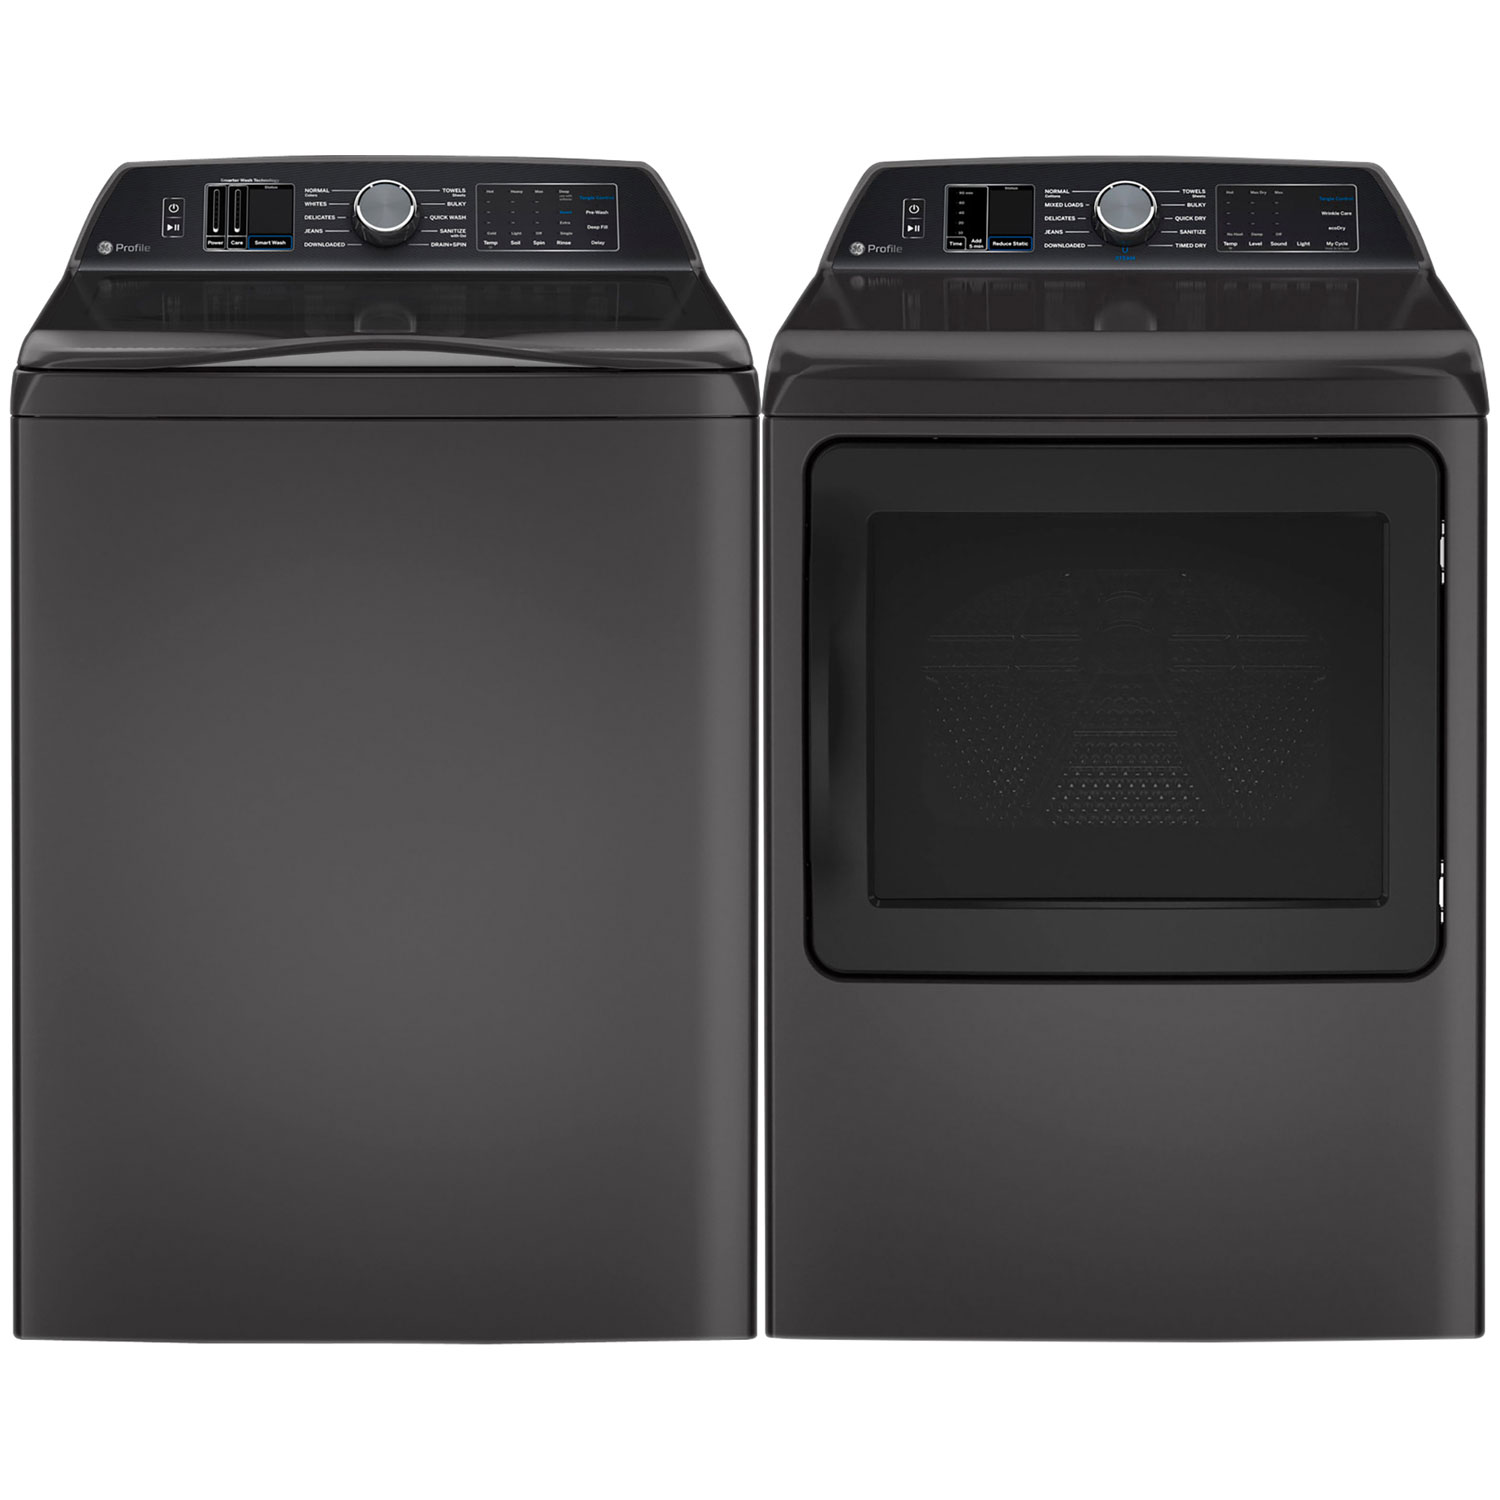 GE Profile 6.2 Cu. Ft. High Efficiency Top Load Washer & 7.4 Cu. Ft. Electric Steam Dryer - Diamond Grey